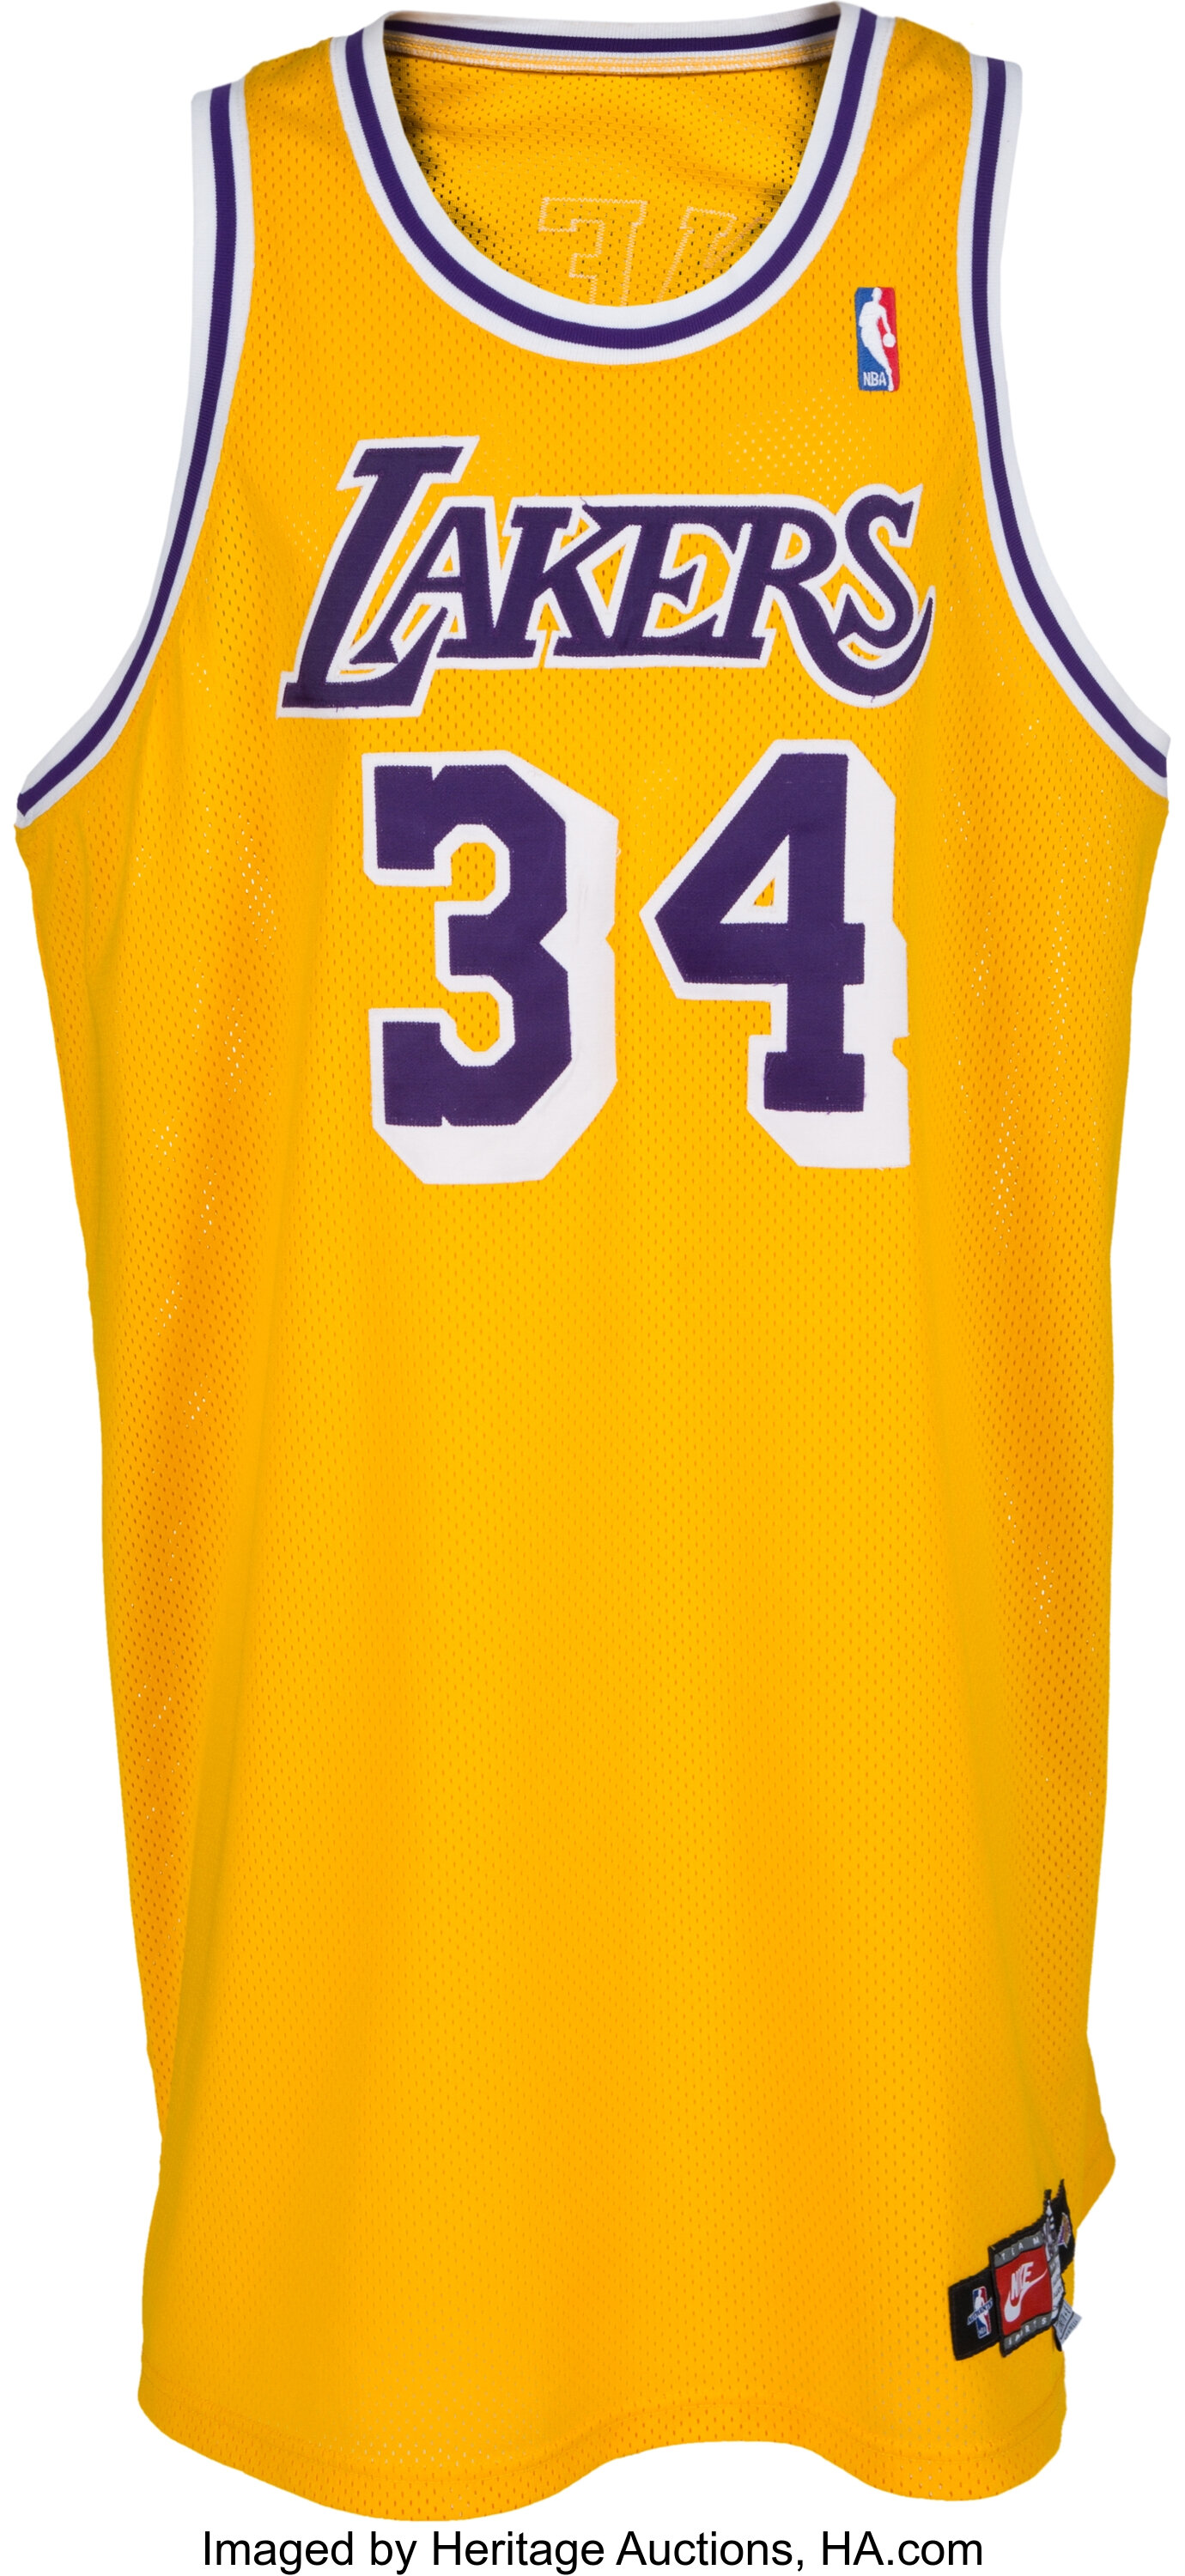 Shaquille O'Neal 2000 Game Worn Jersey Piece for Sale in